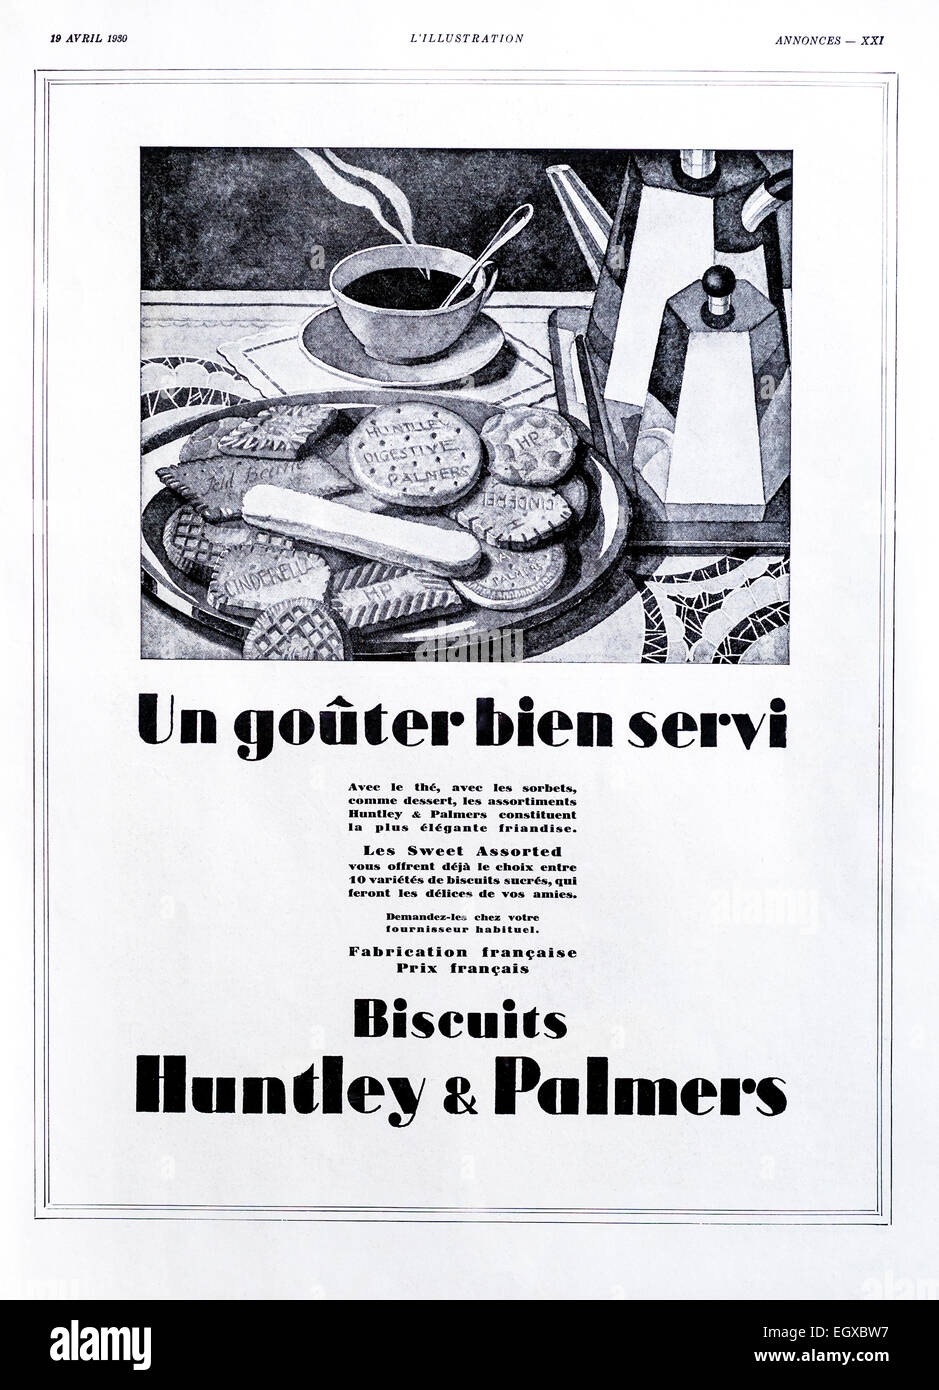 1930 advert for “Huntley & Palmers” biscuits from French “L’Illustration” magazine. Stock Photo